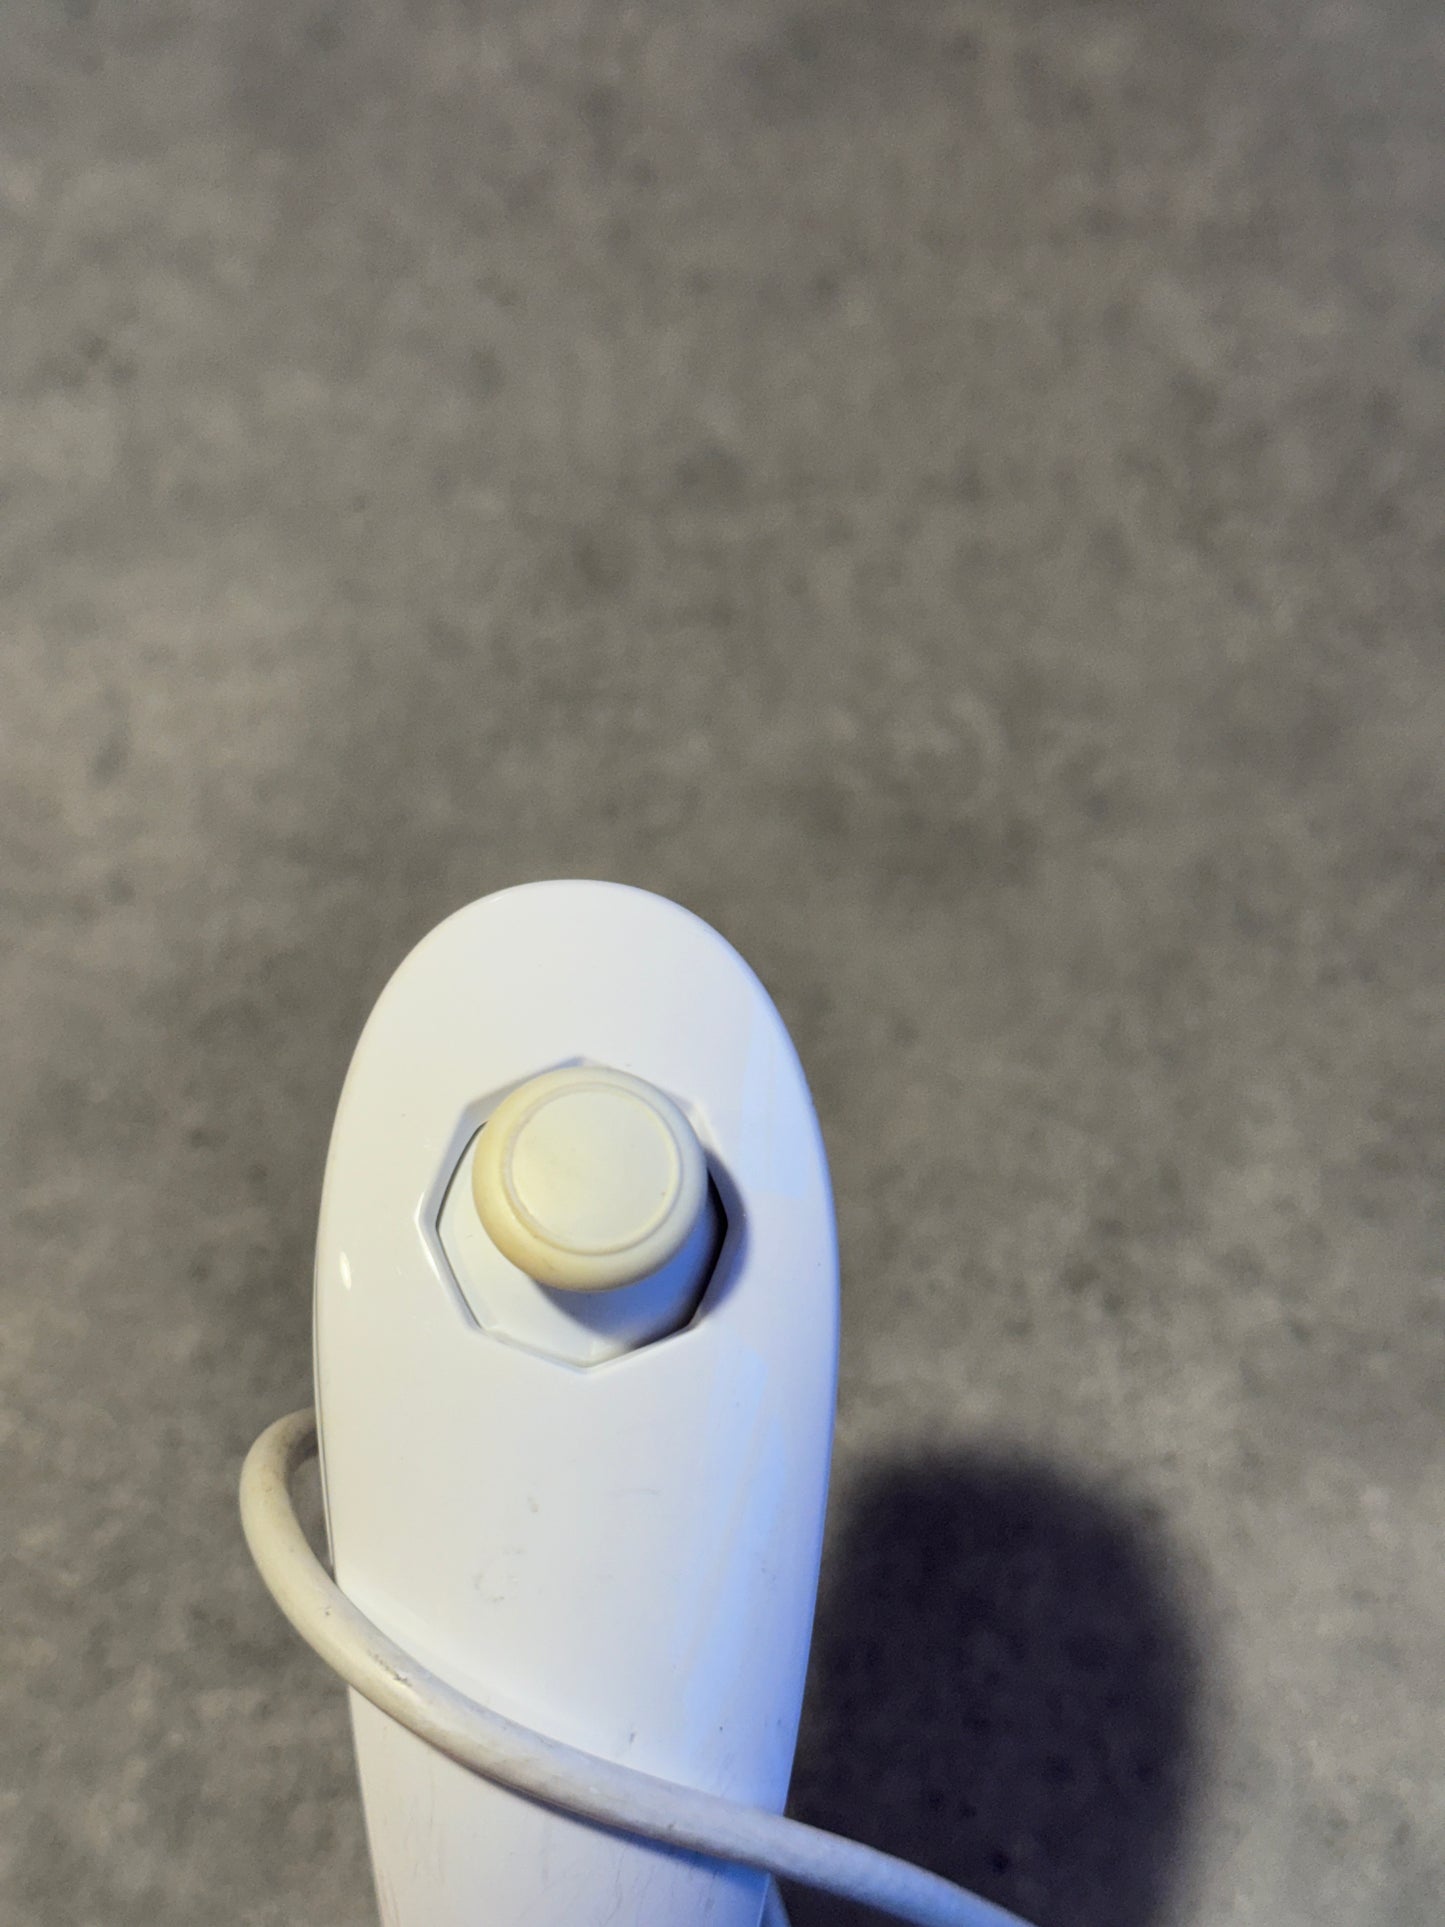 Replacement Nintendo Wii Nunchuck - White Acceptable